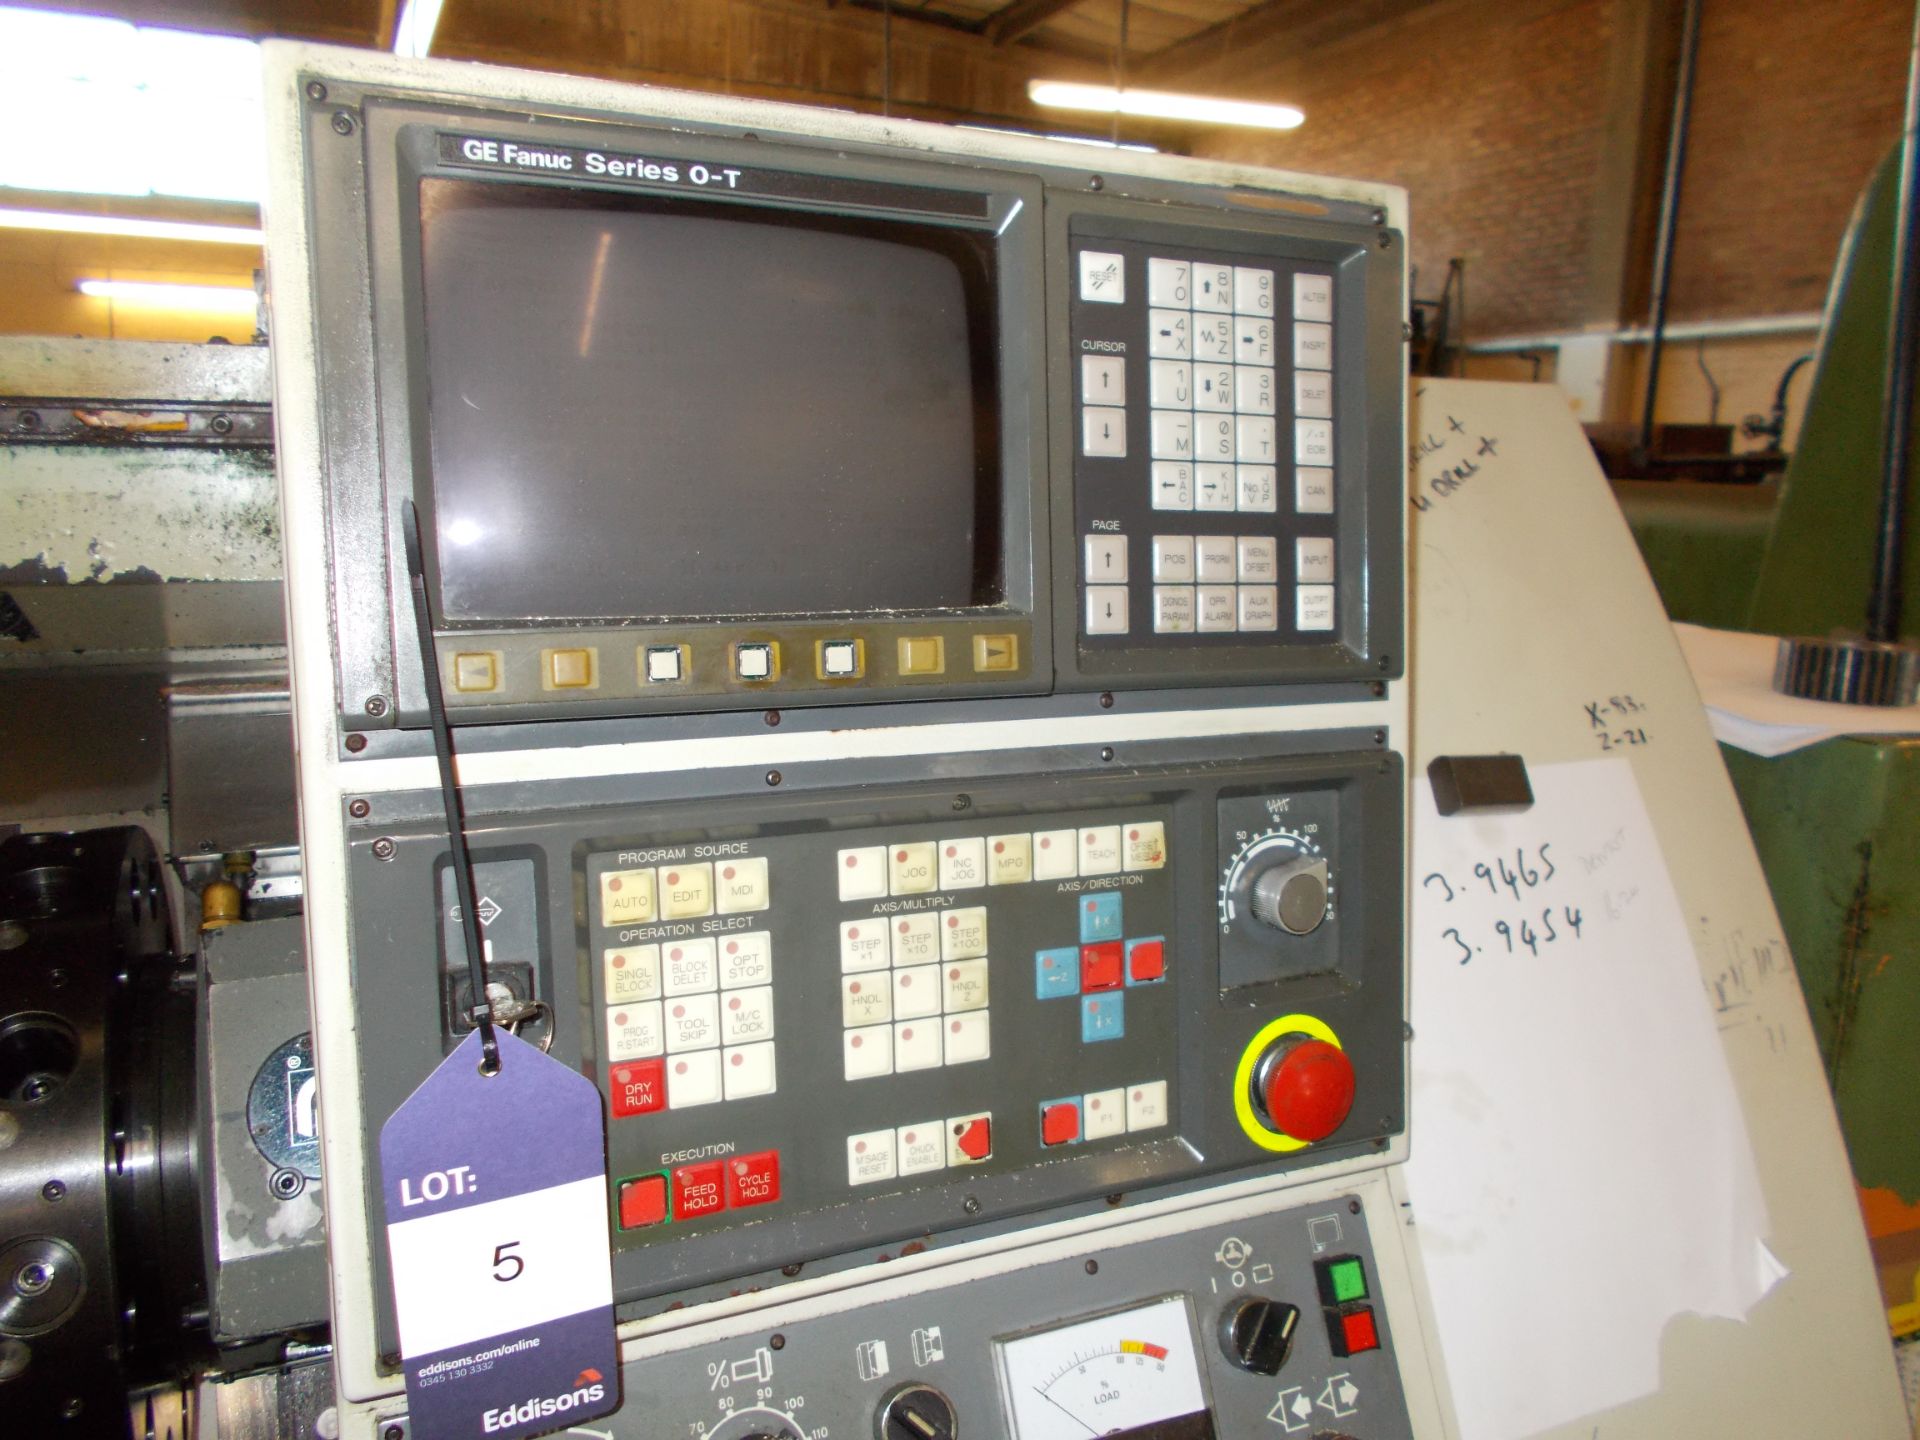 Colchester Tornado 200 CNC lathe (Serial Number: C20241, Year: 1995), with Fanuc Series OT control - Image 5 of 6